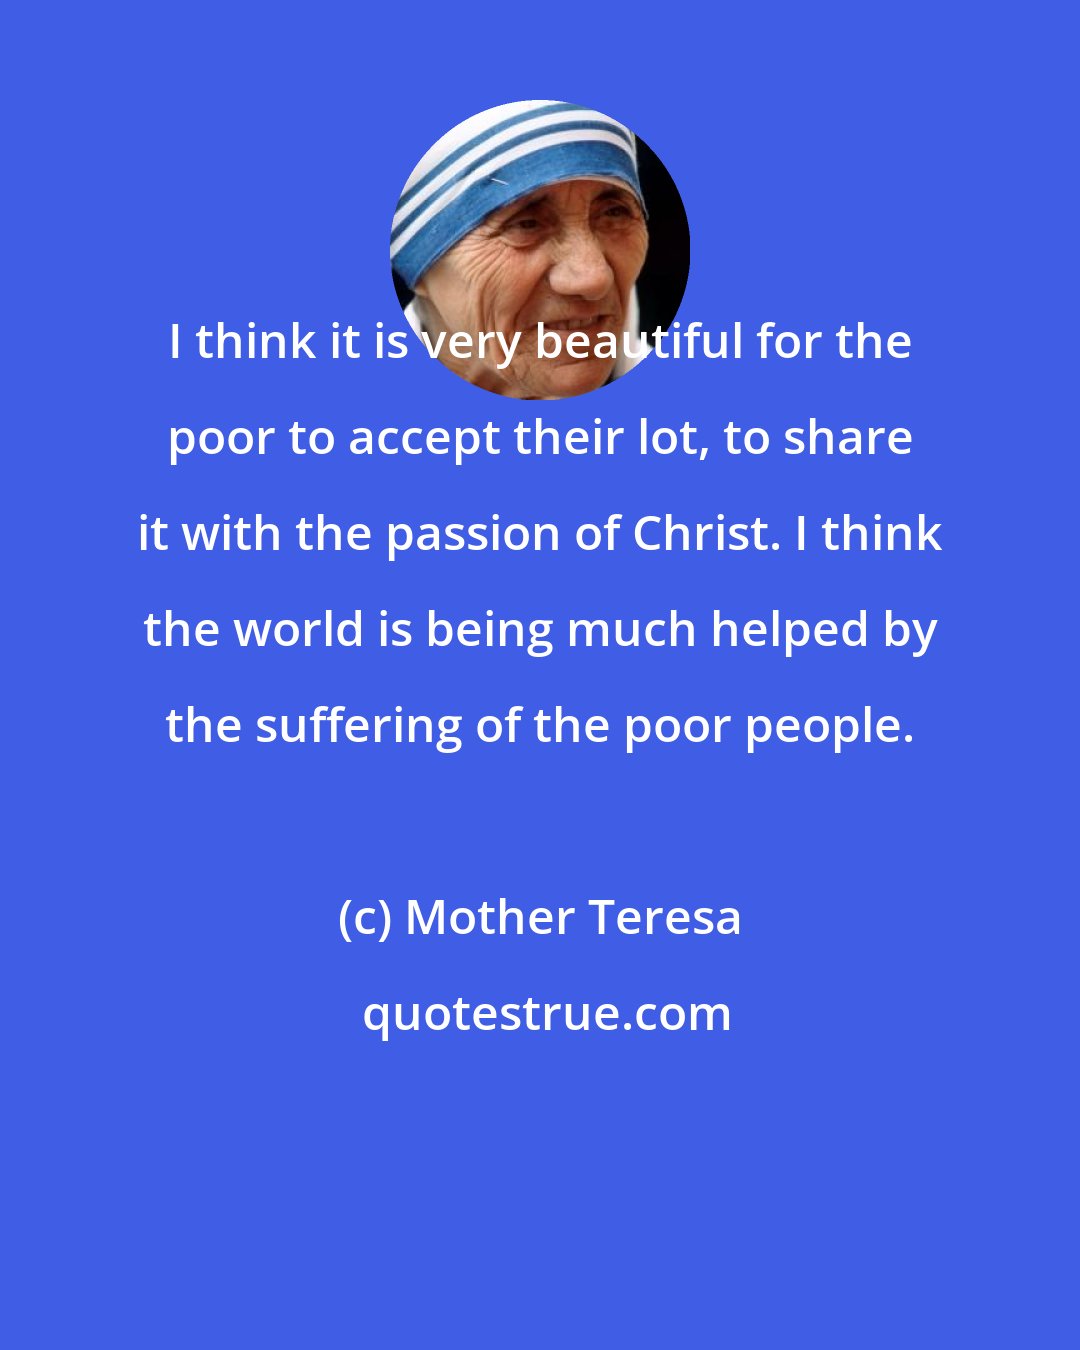 Mother Teresa: I think it is very beautiful for the poor to accept their lot, to share it with the passion of Christ. I think the world is being much helped by the suffering of the poor people.